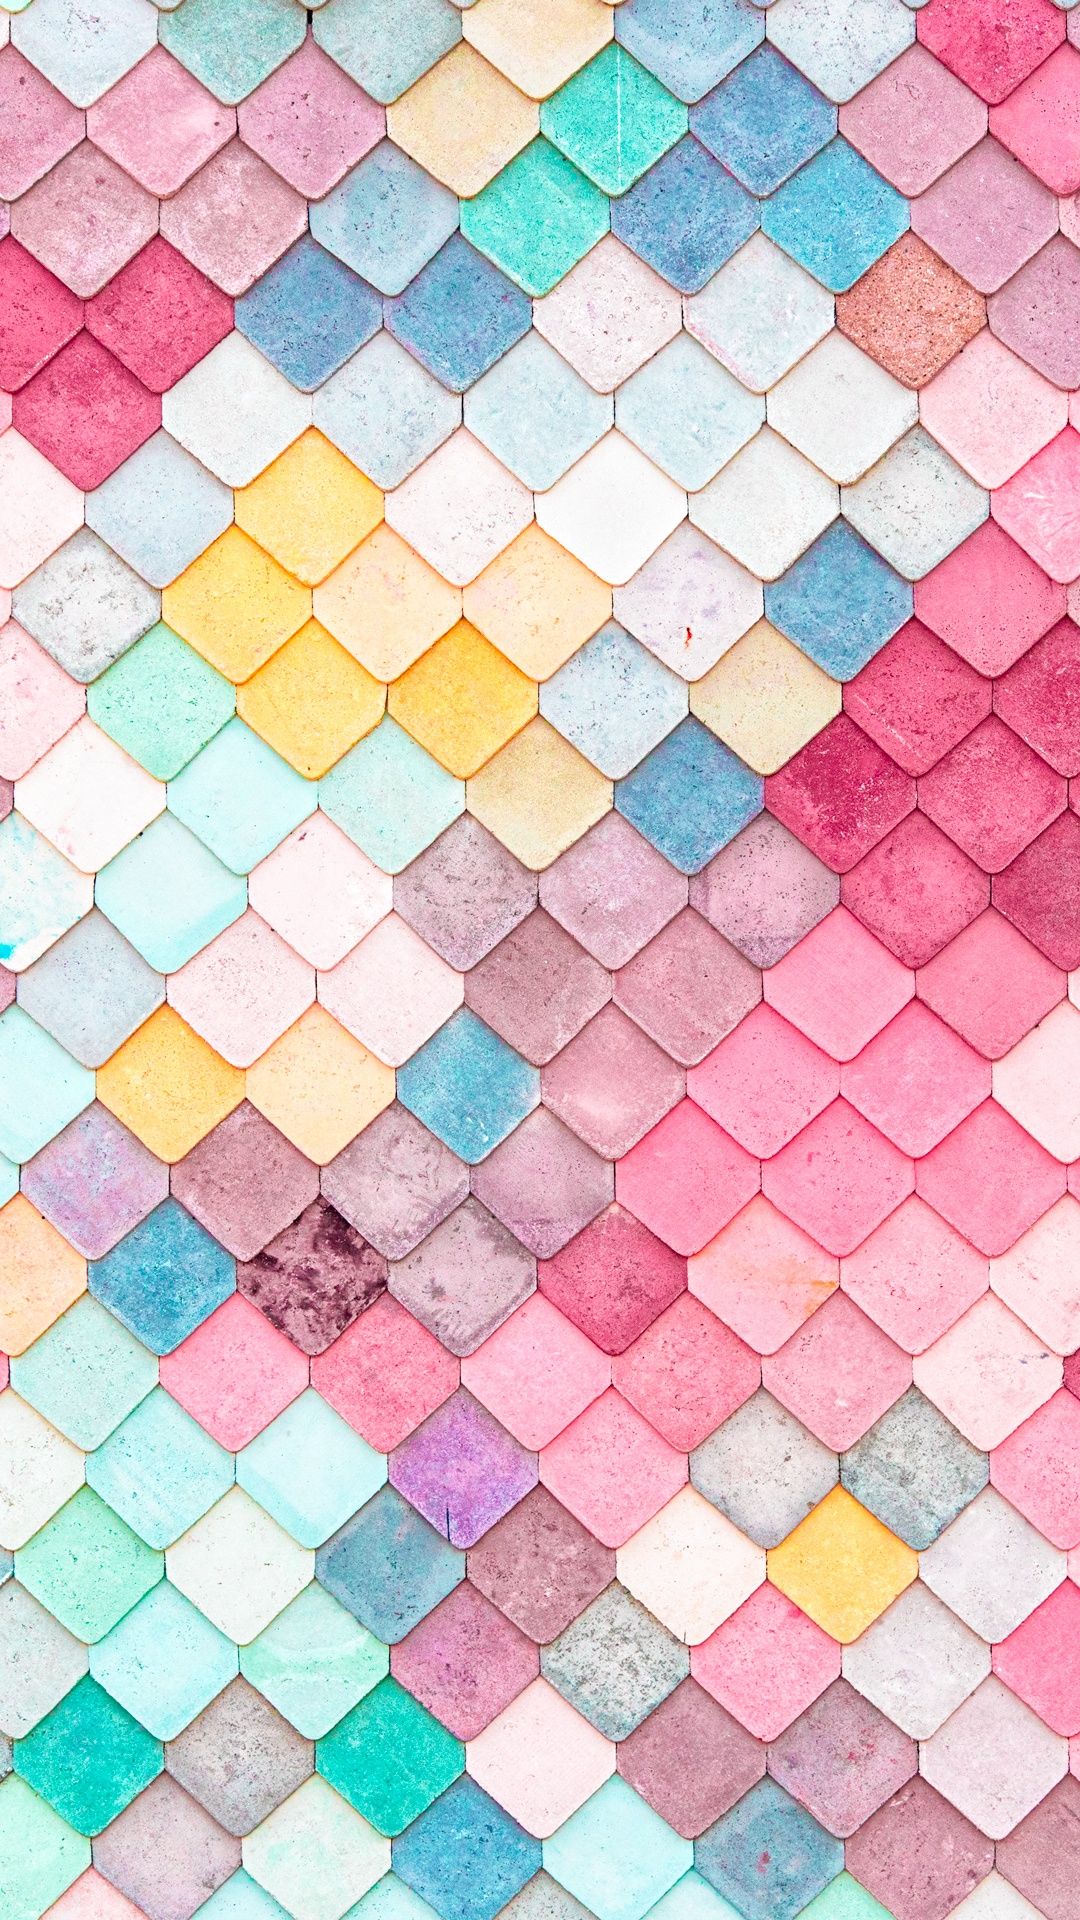 Colorful Roof Tiles Pattern iPhone 8 Wallpaper Free Download